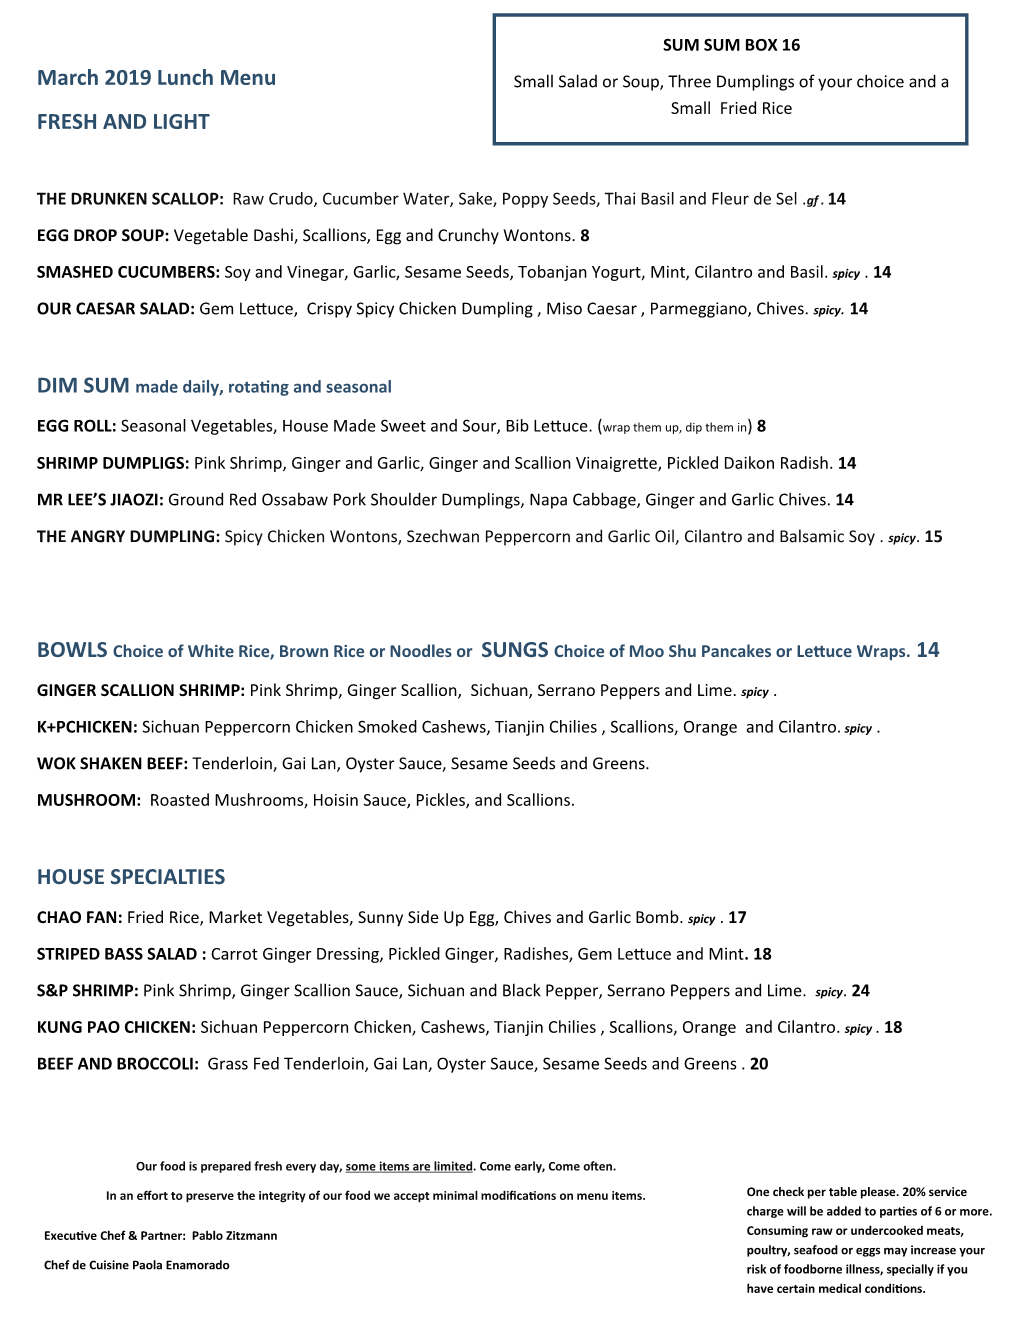 March 2019 Lunch Menu FRESH and LIGHT HOUSE SPECIALTIES